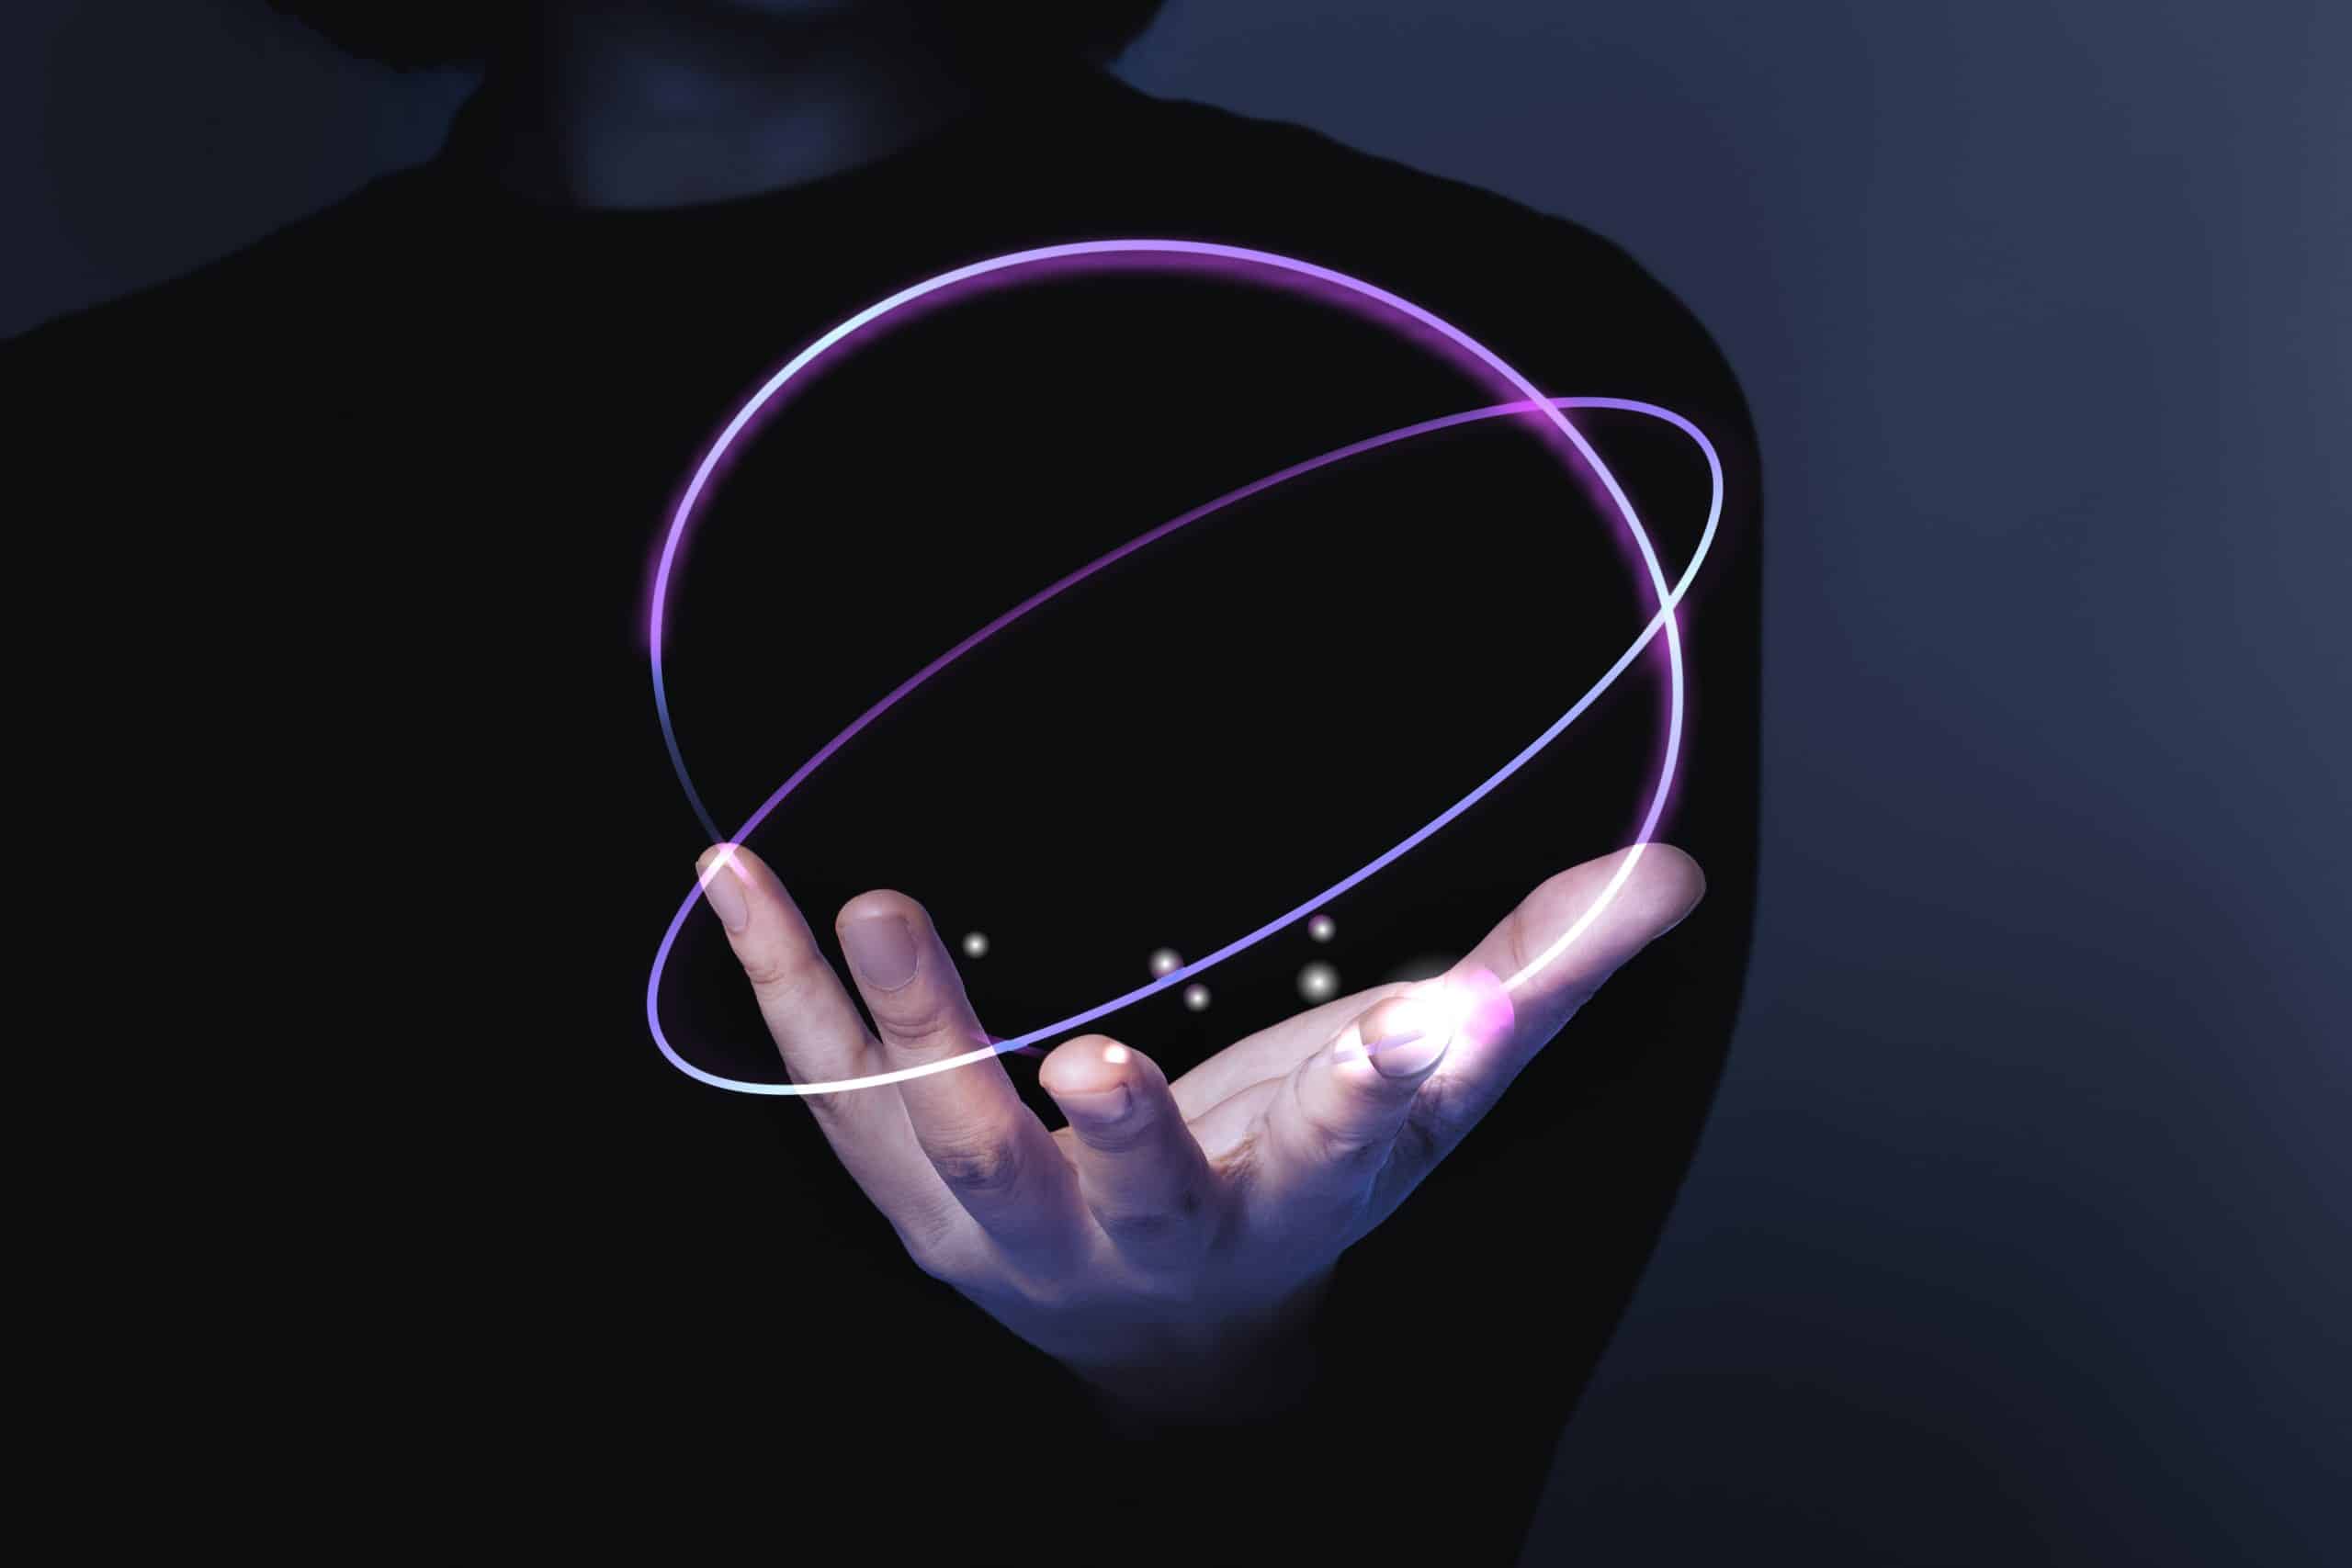 A person is holding a digitally-imposed, glowing purple ring orbiting around their hand, creating a futuristic effect.